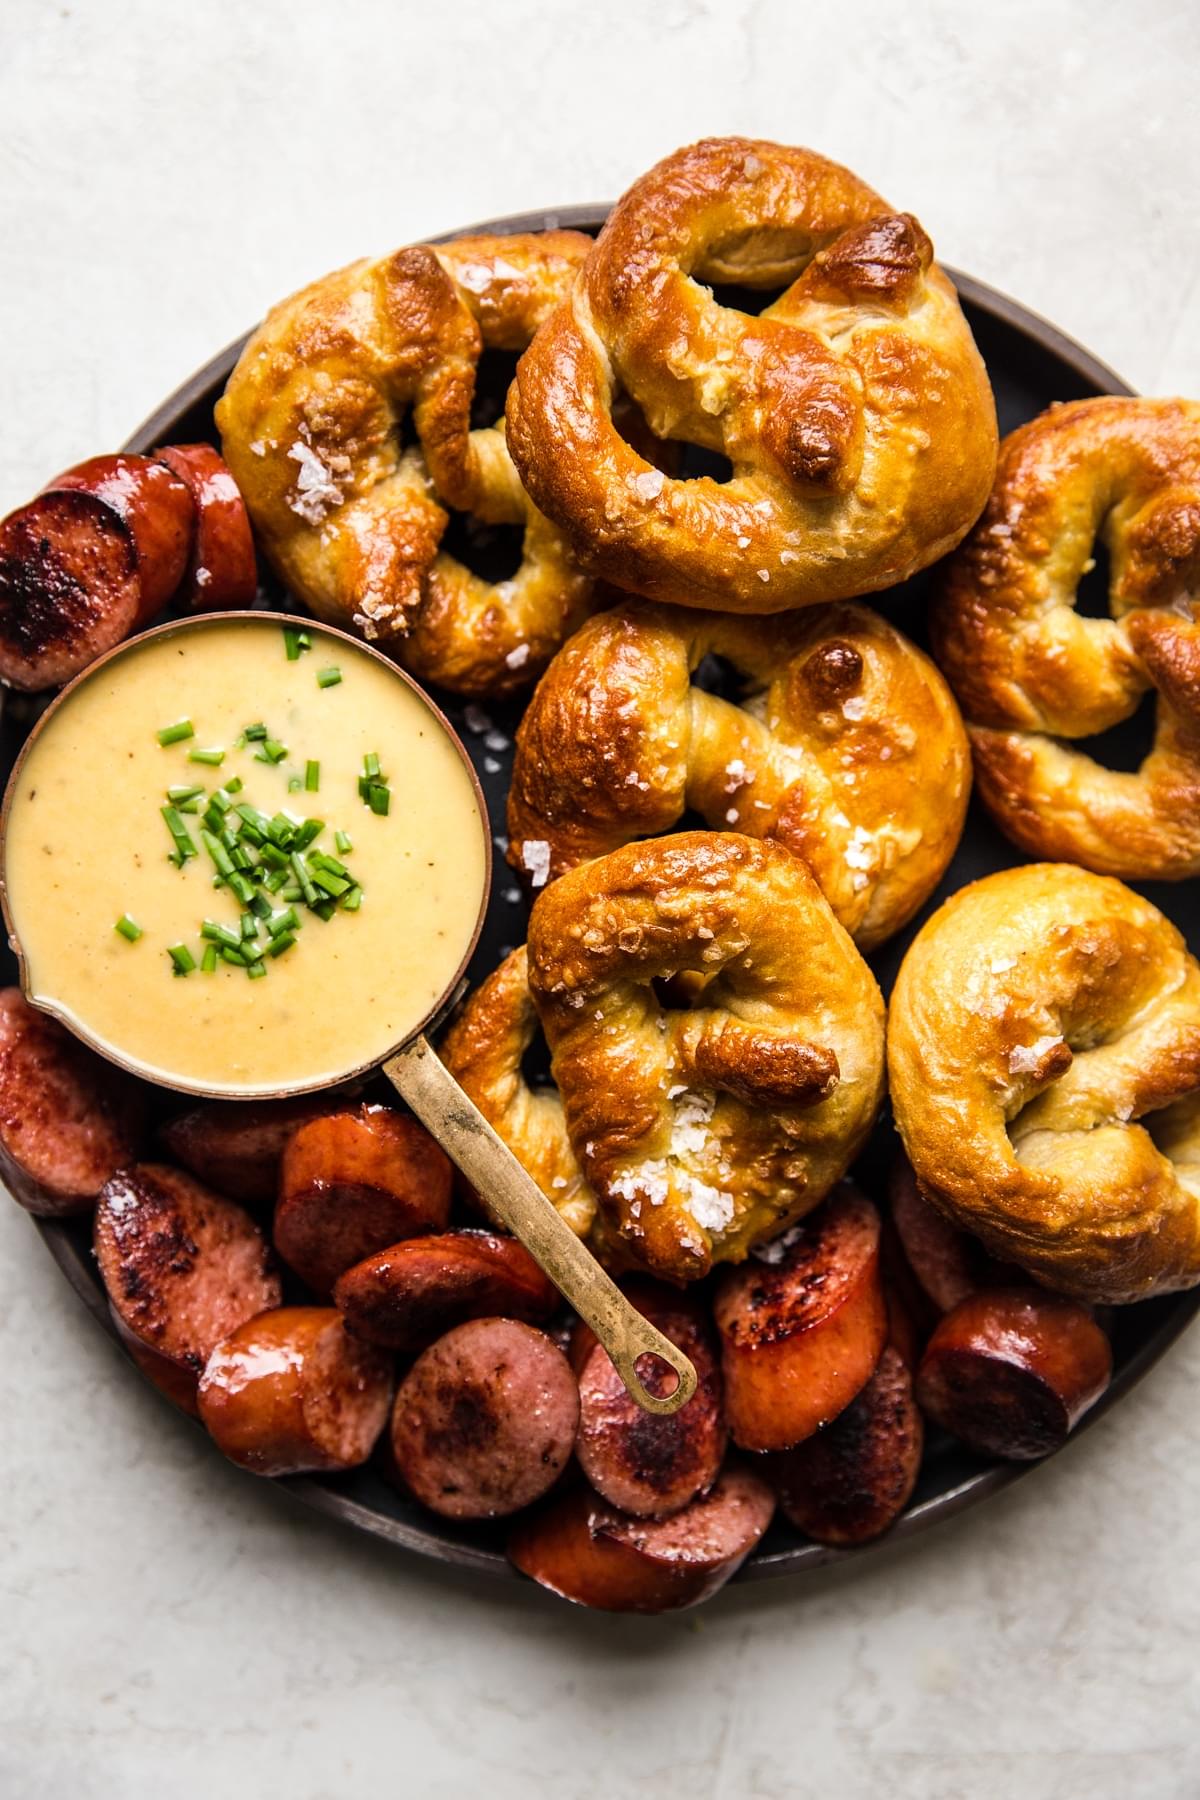 large plate with white cheddar beer cheese dip in small bowl next to soft pretzels and sausage slices